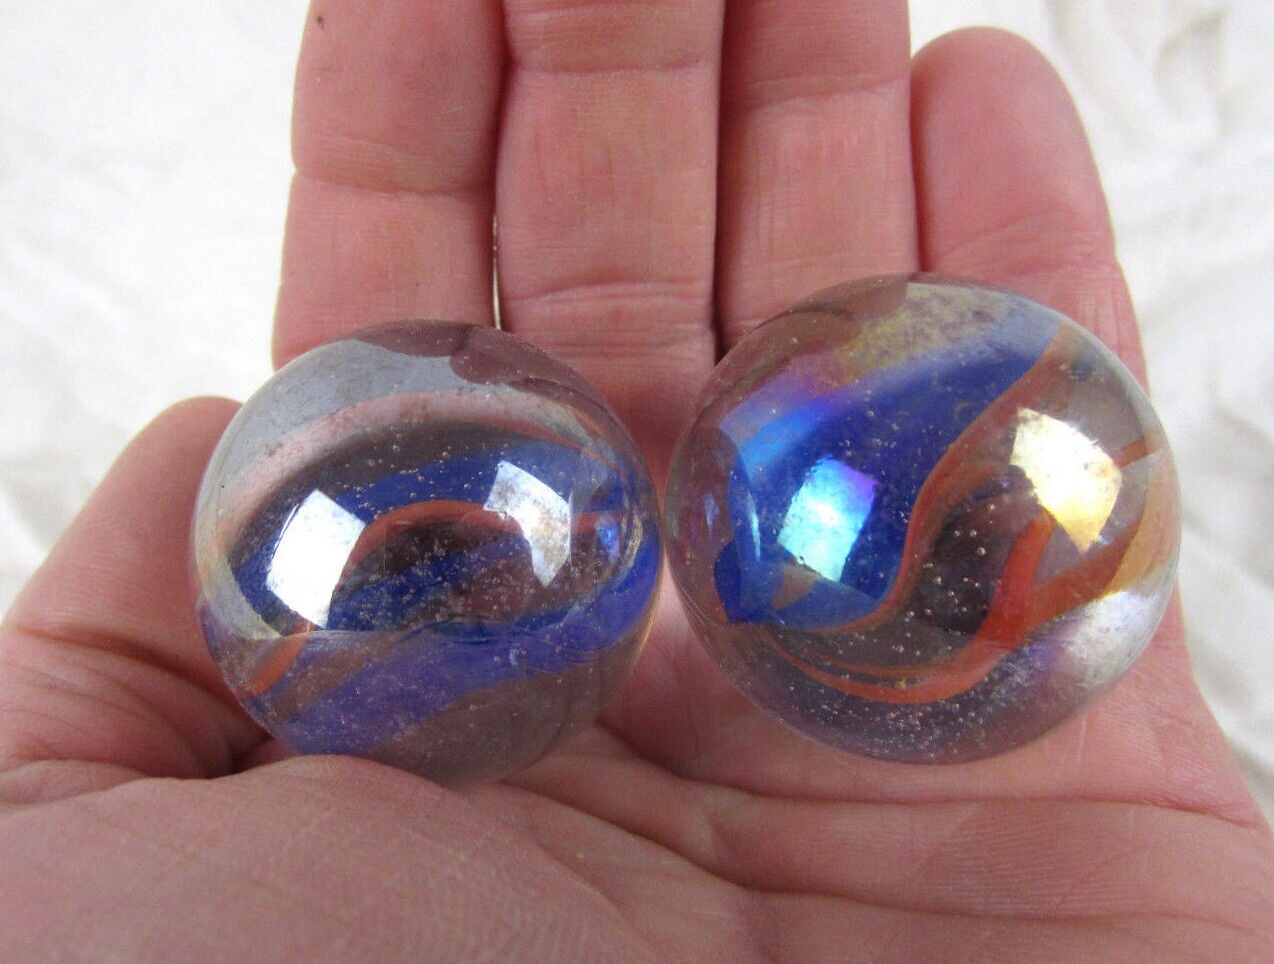 2 Boulders 35mm FUNFAIR Marbles glass ball Clear Red Blue Ribbon 6 Vane large